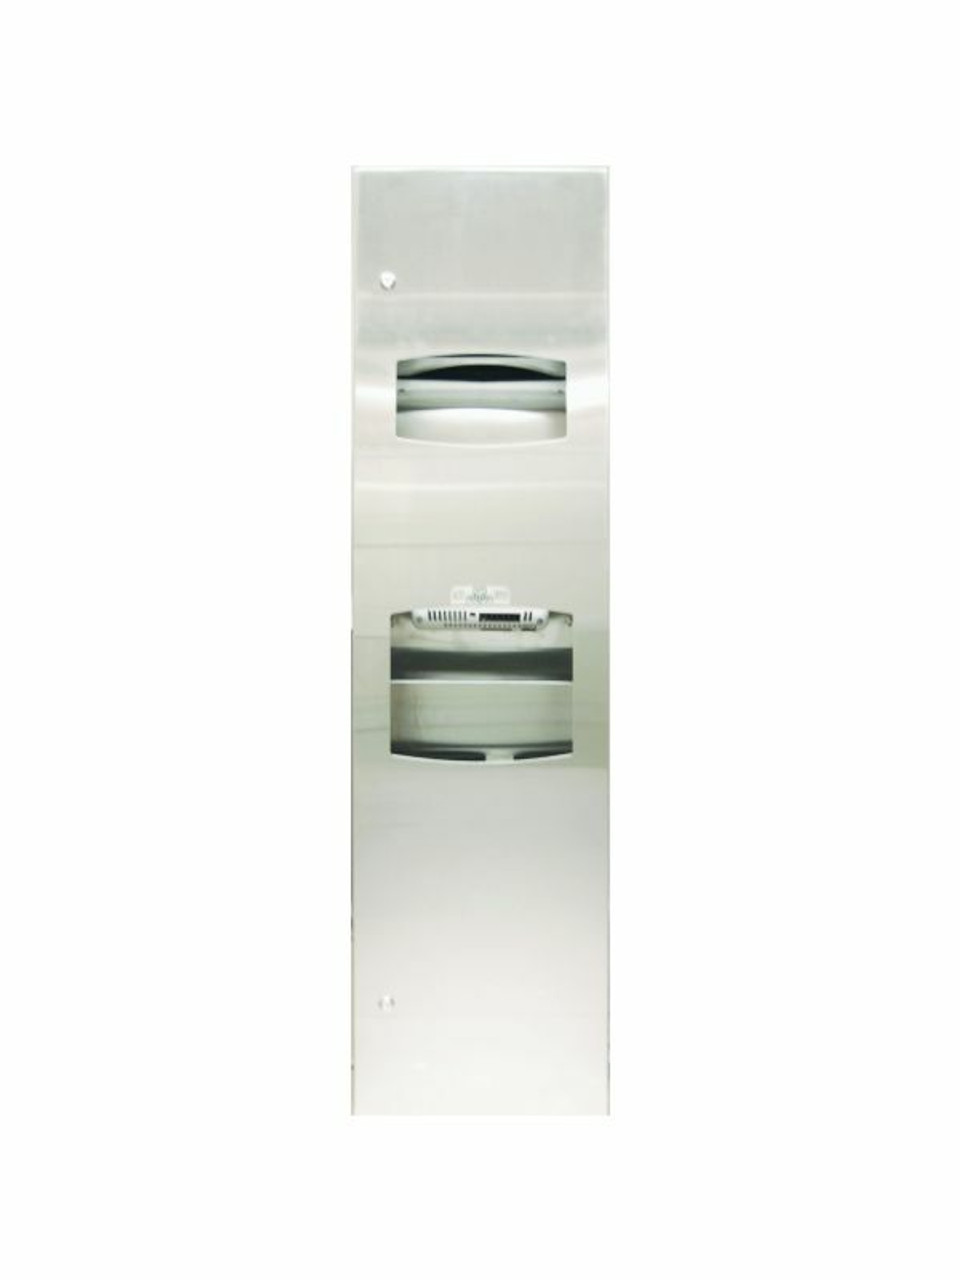 Recessed counter top hand towel dispenser in stainless steel